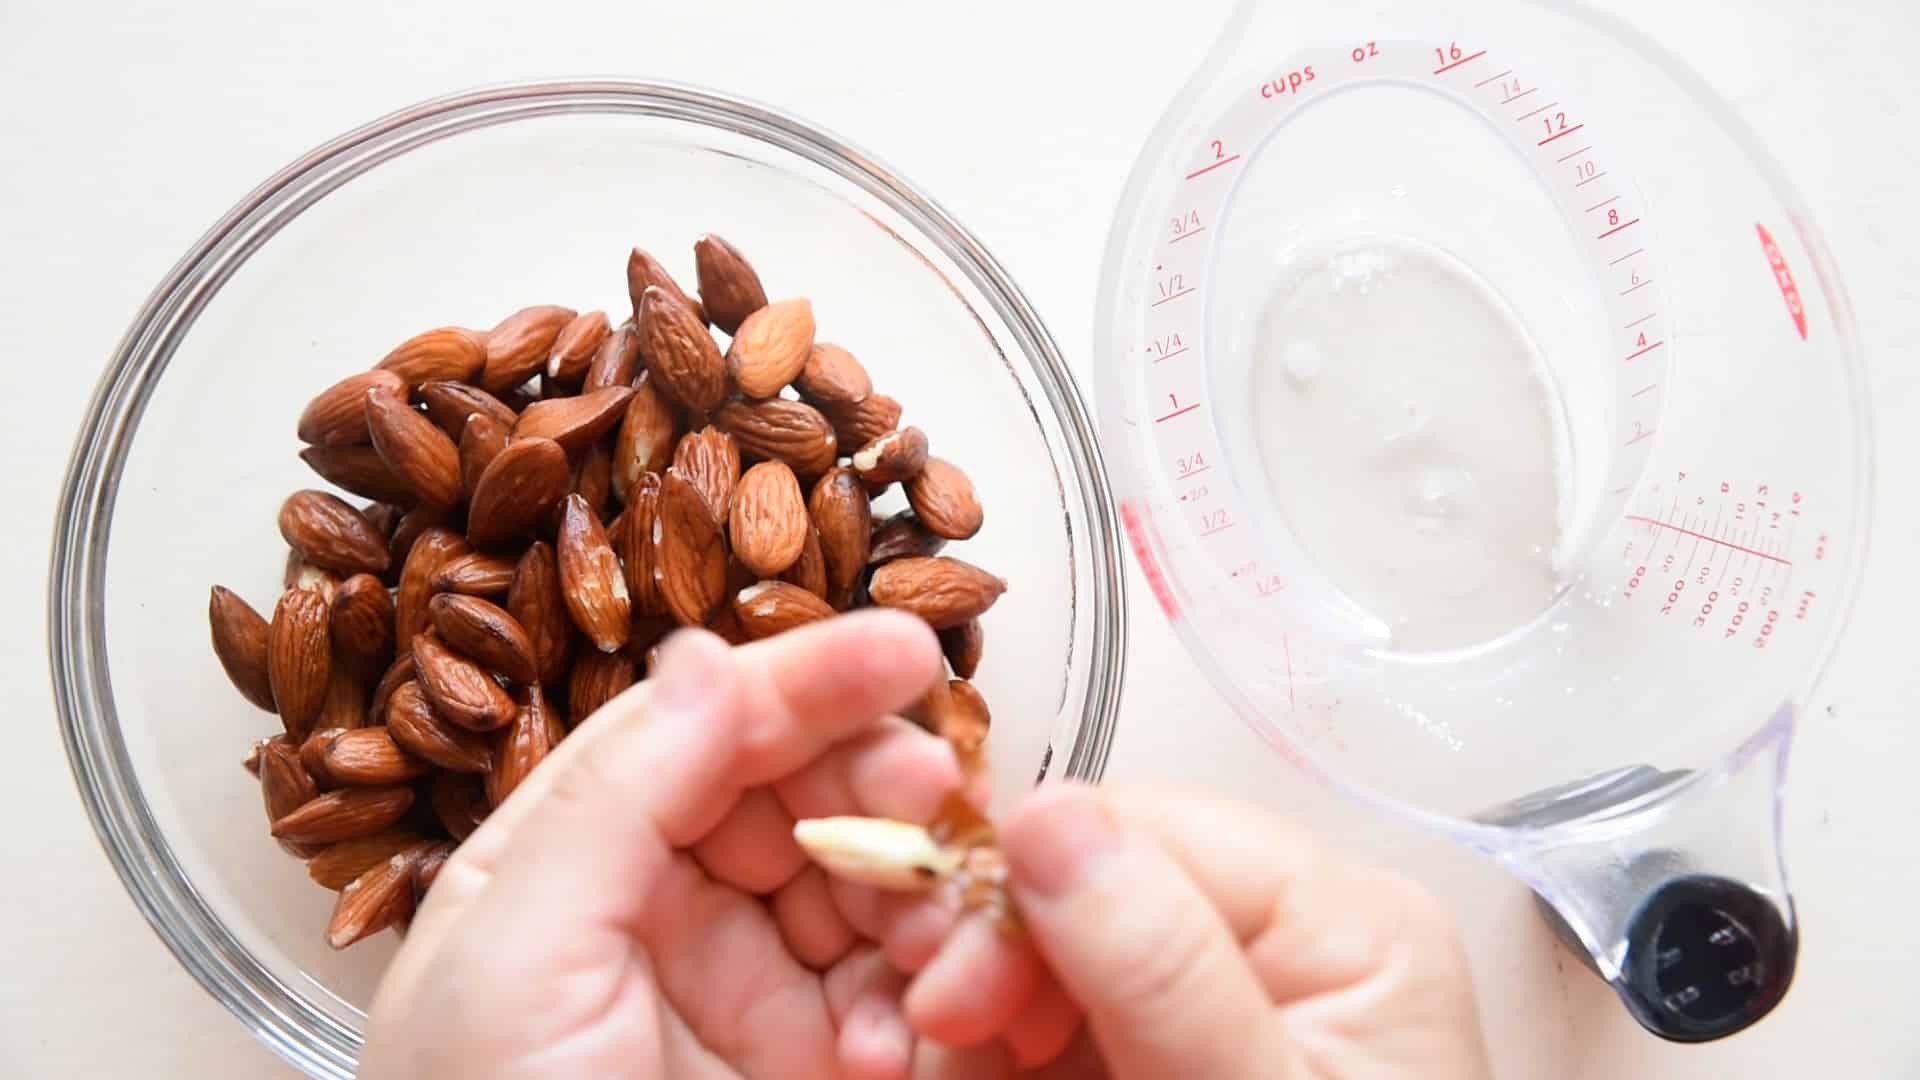 peel the almonds by squeezing the skin off